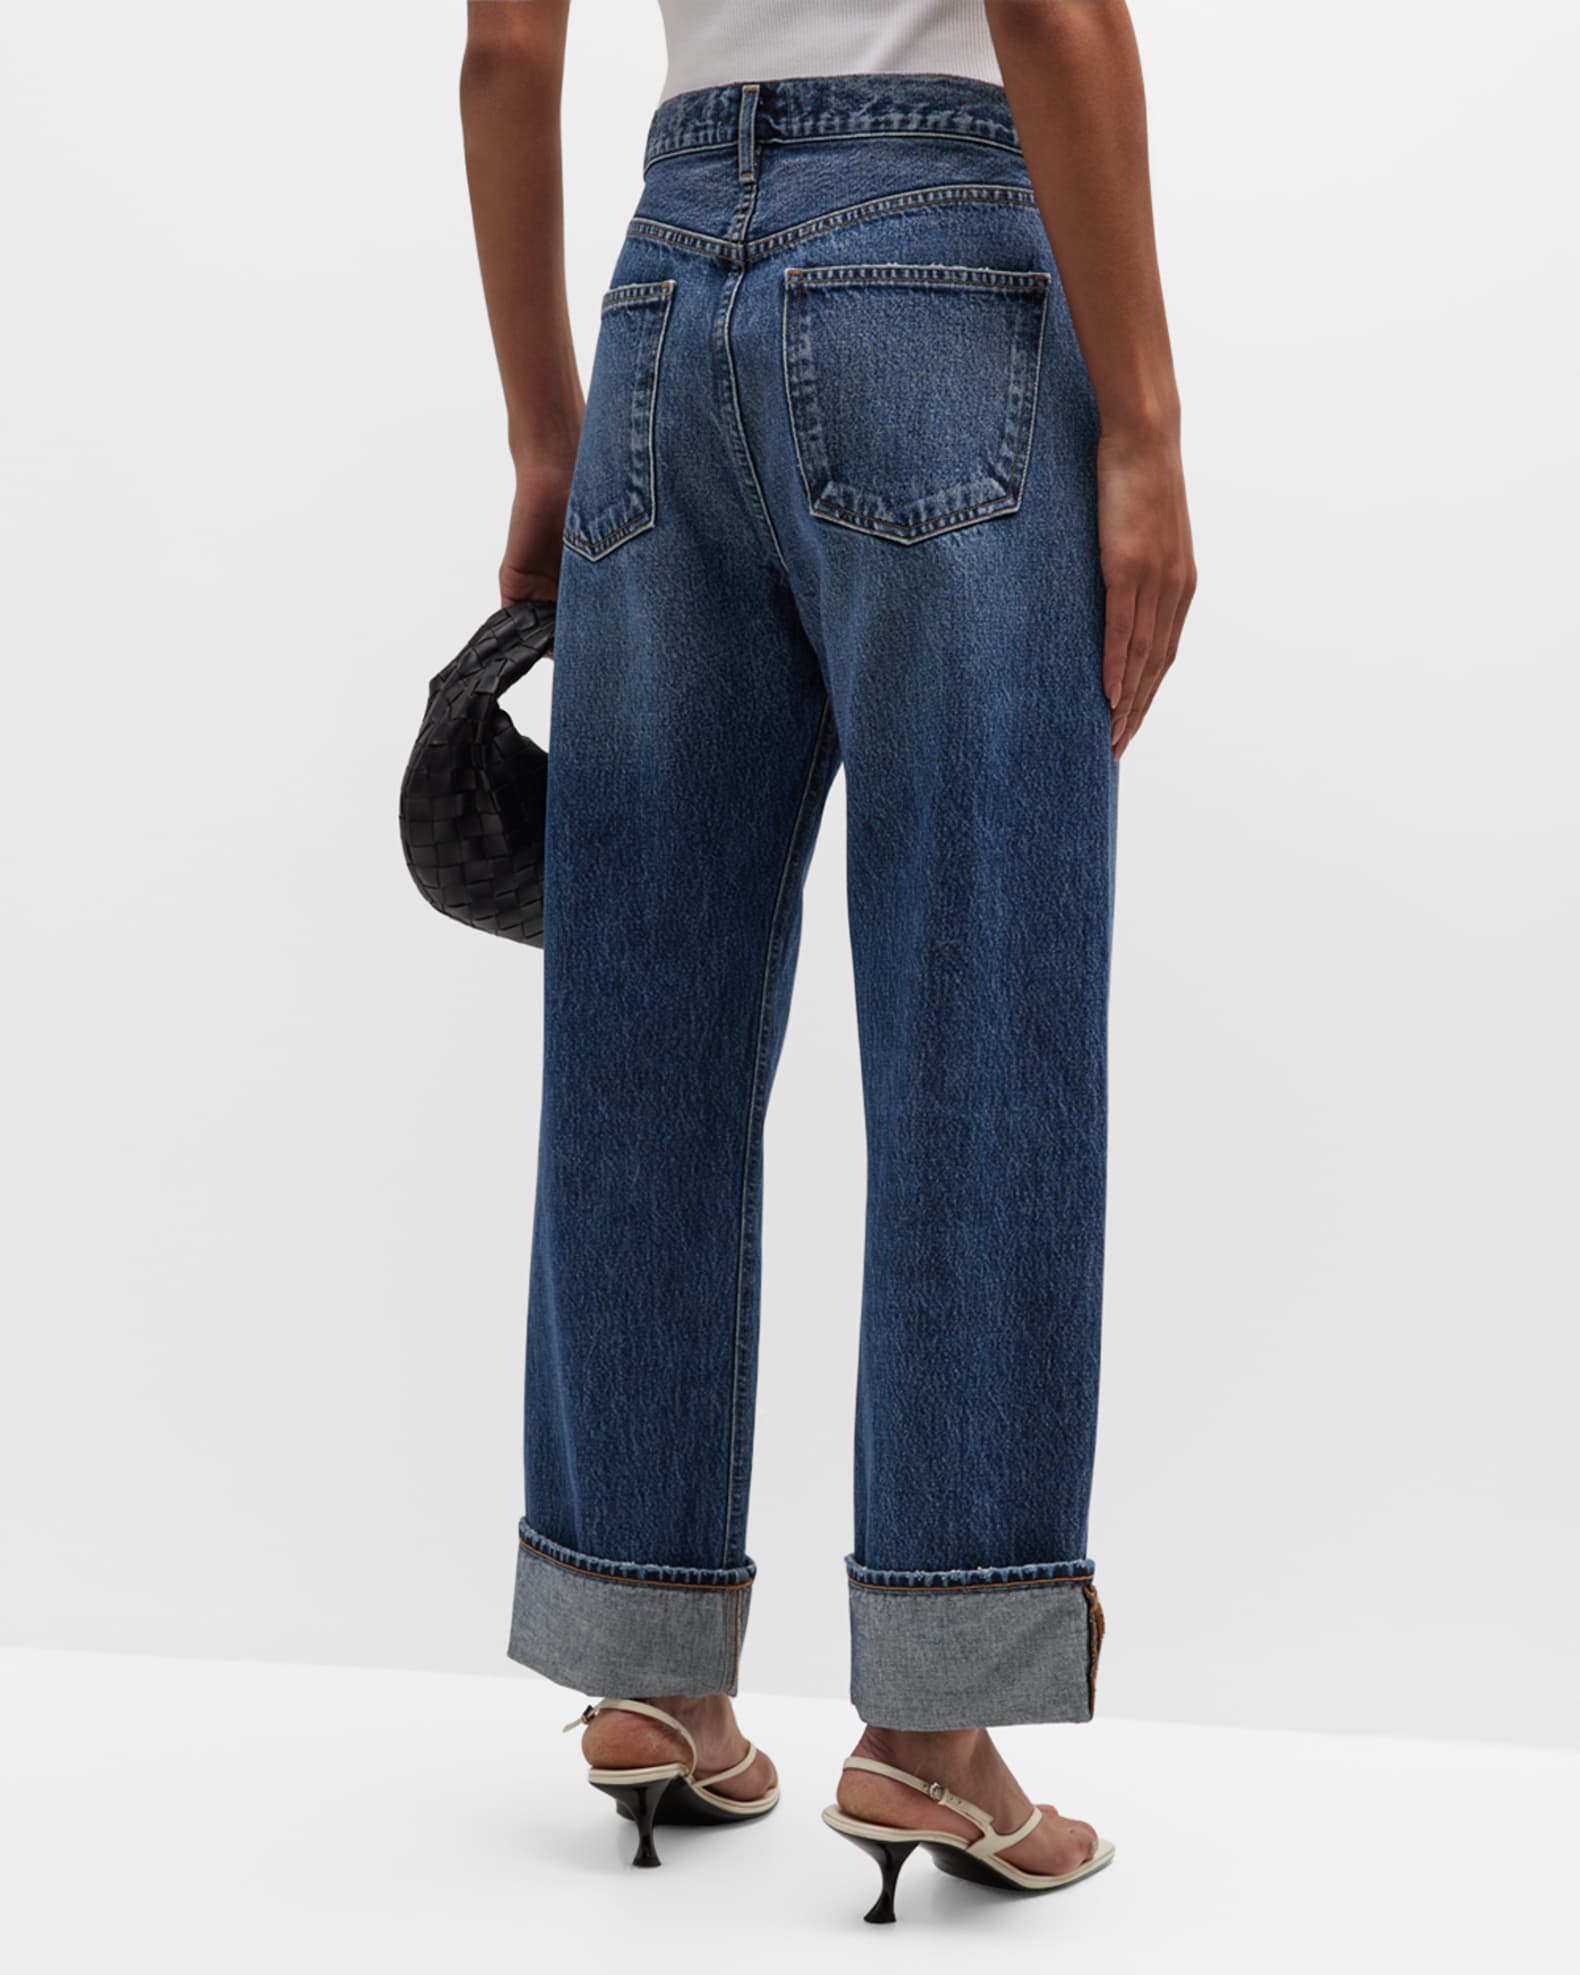 AGOLDE Fran Easy Straight Jeans | Neiman Marcus